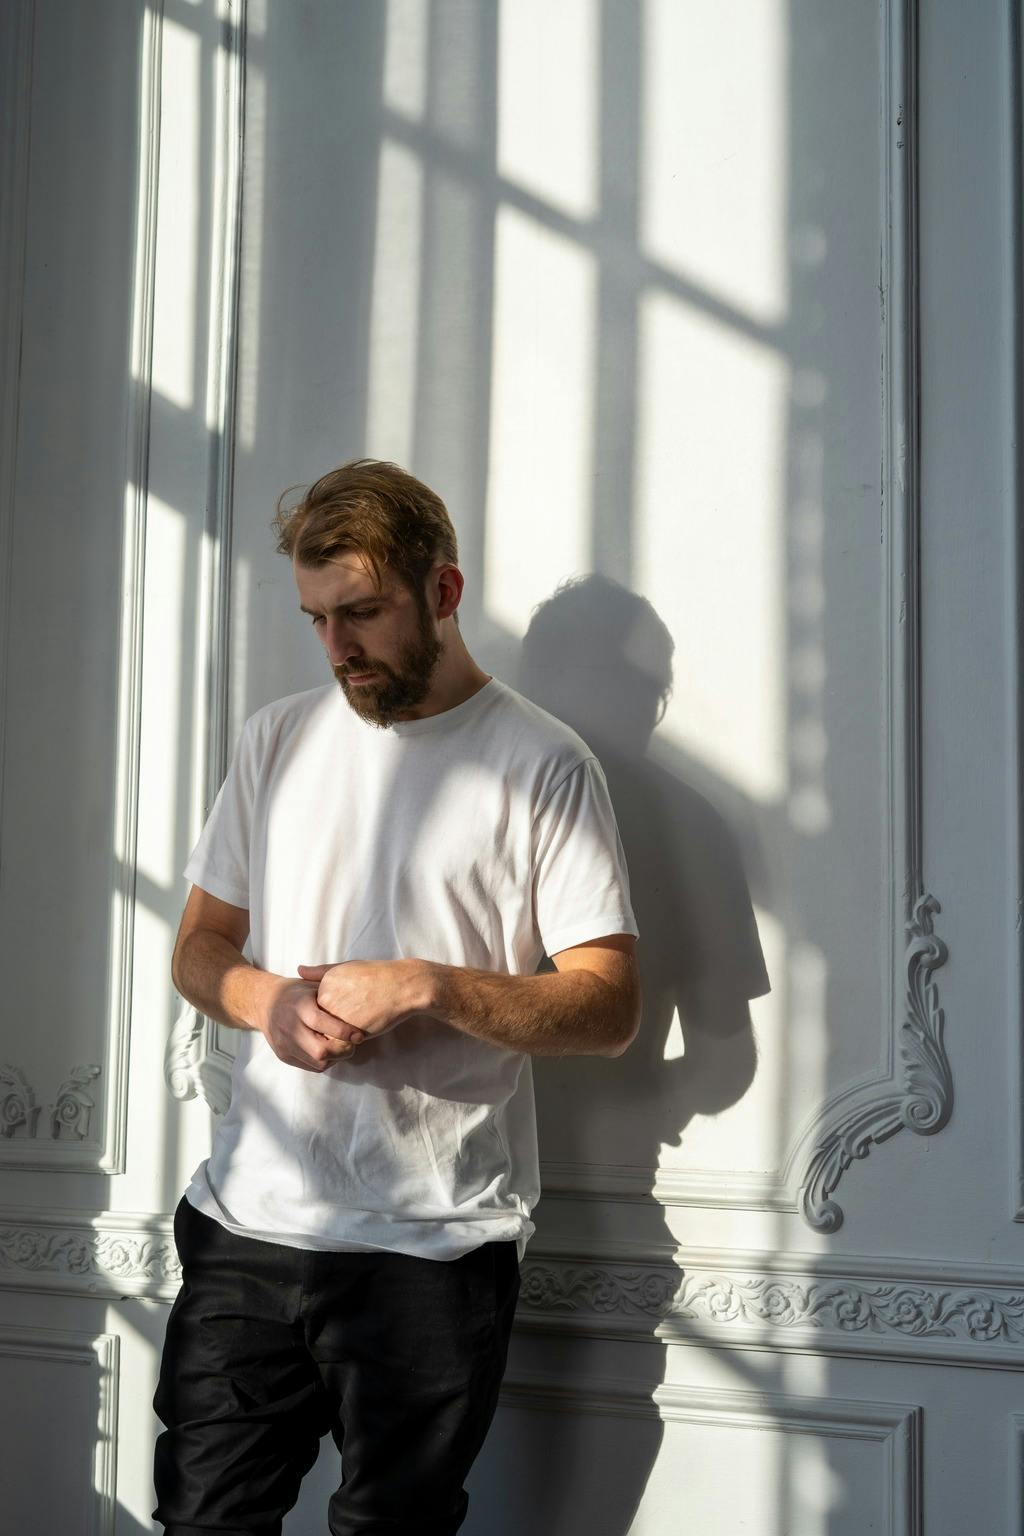 Man in t-shirt leans against a wall and looks down forlornly.